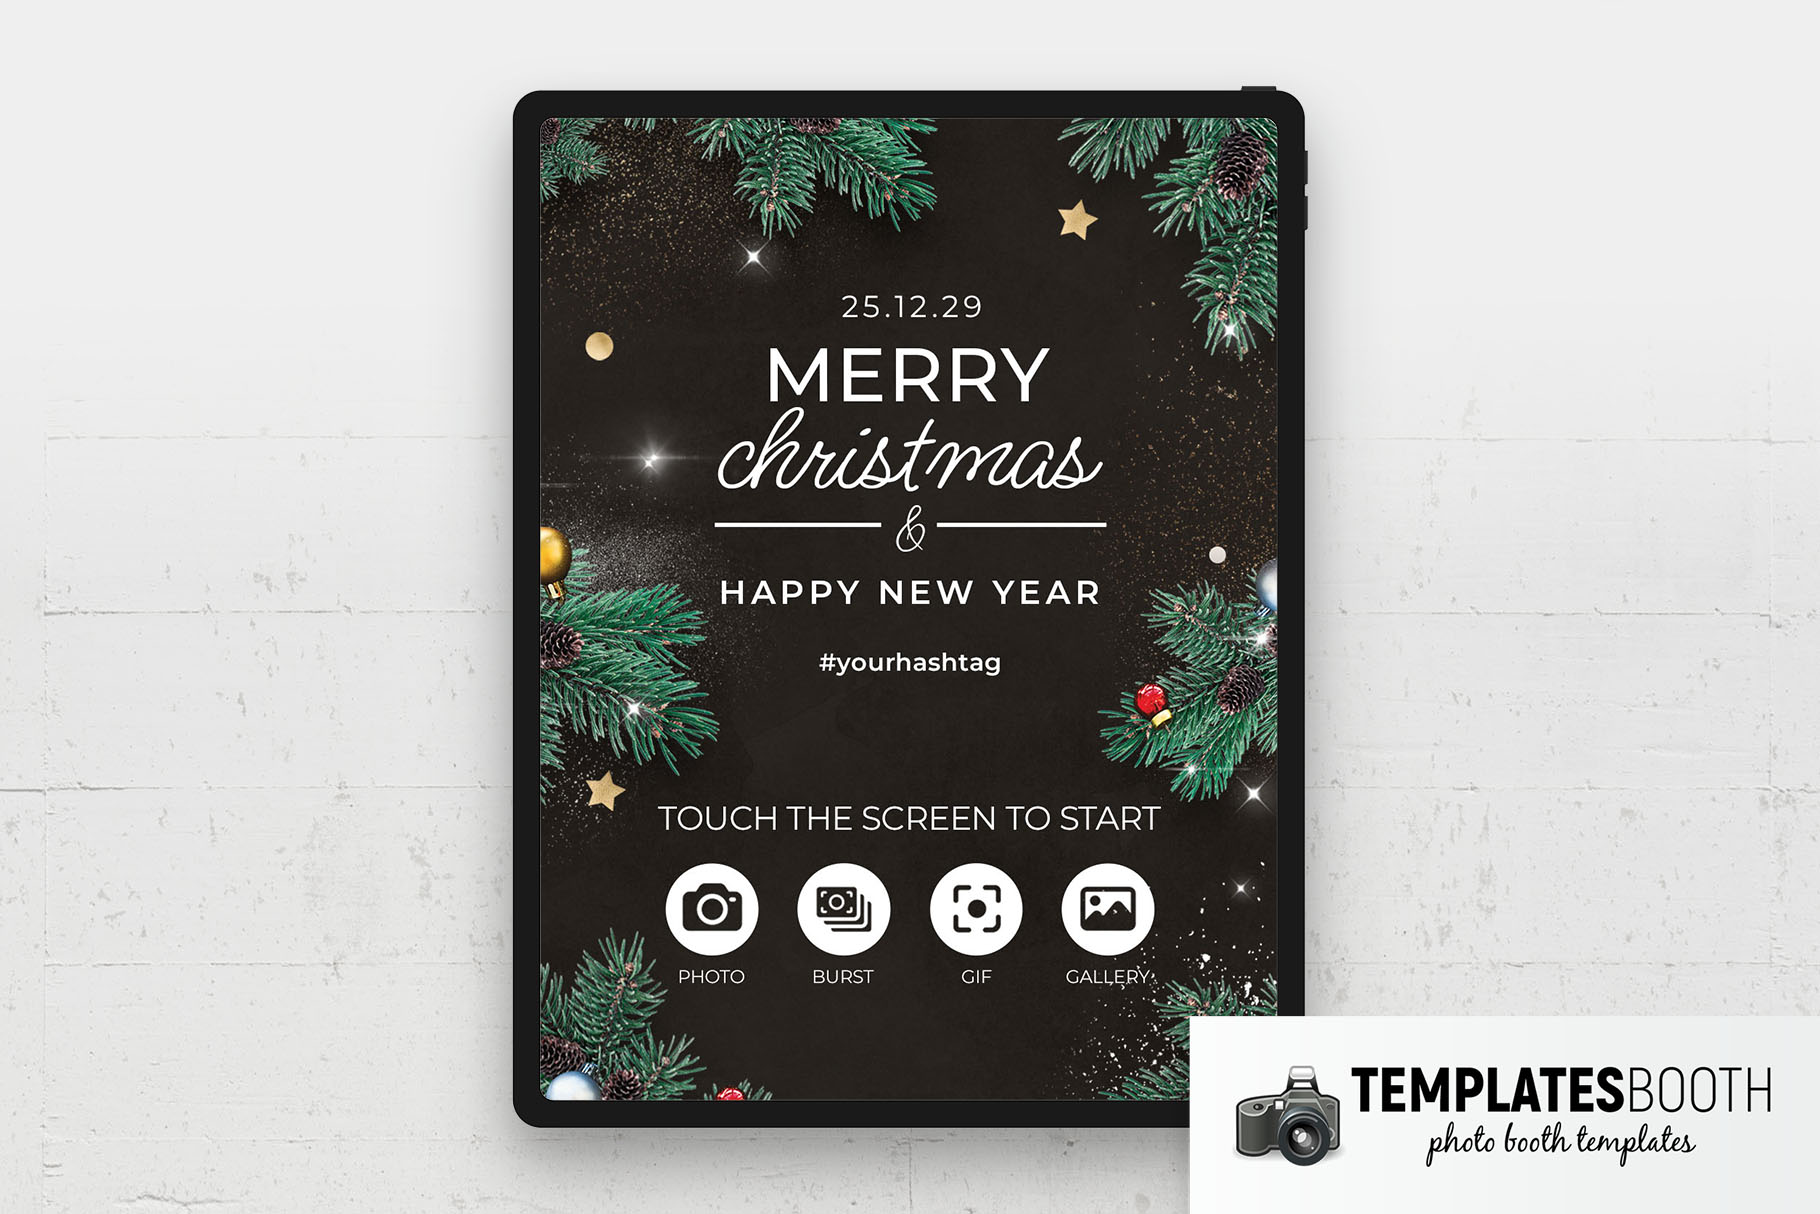 Festive Christmas Photo Booth Welcome Screen